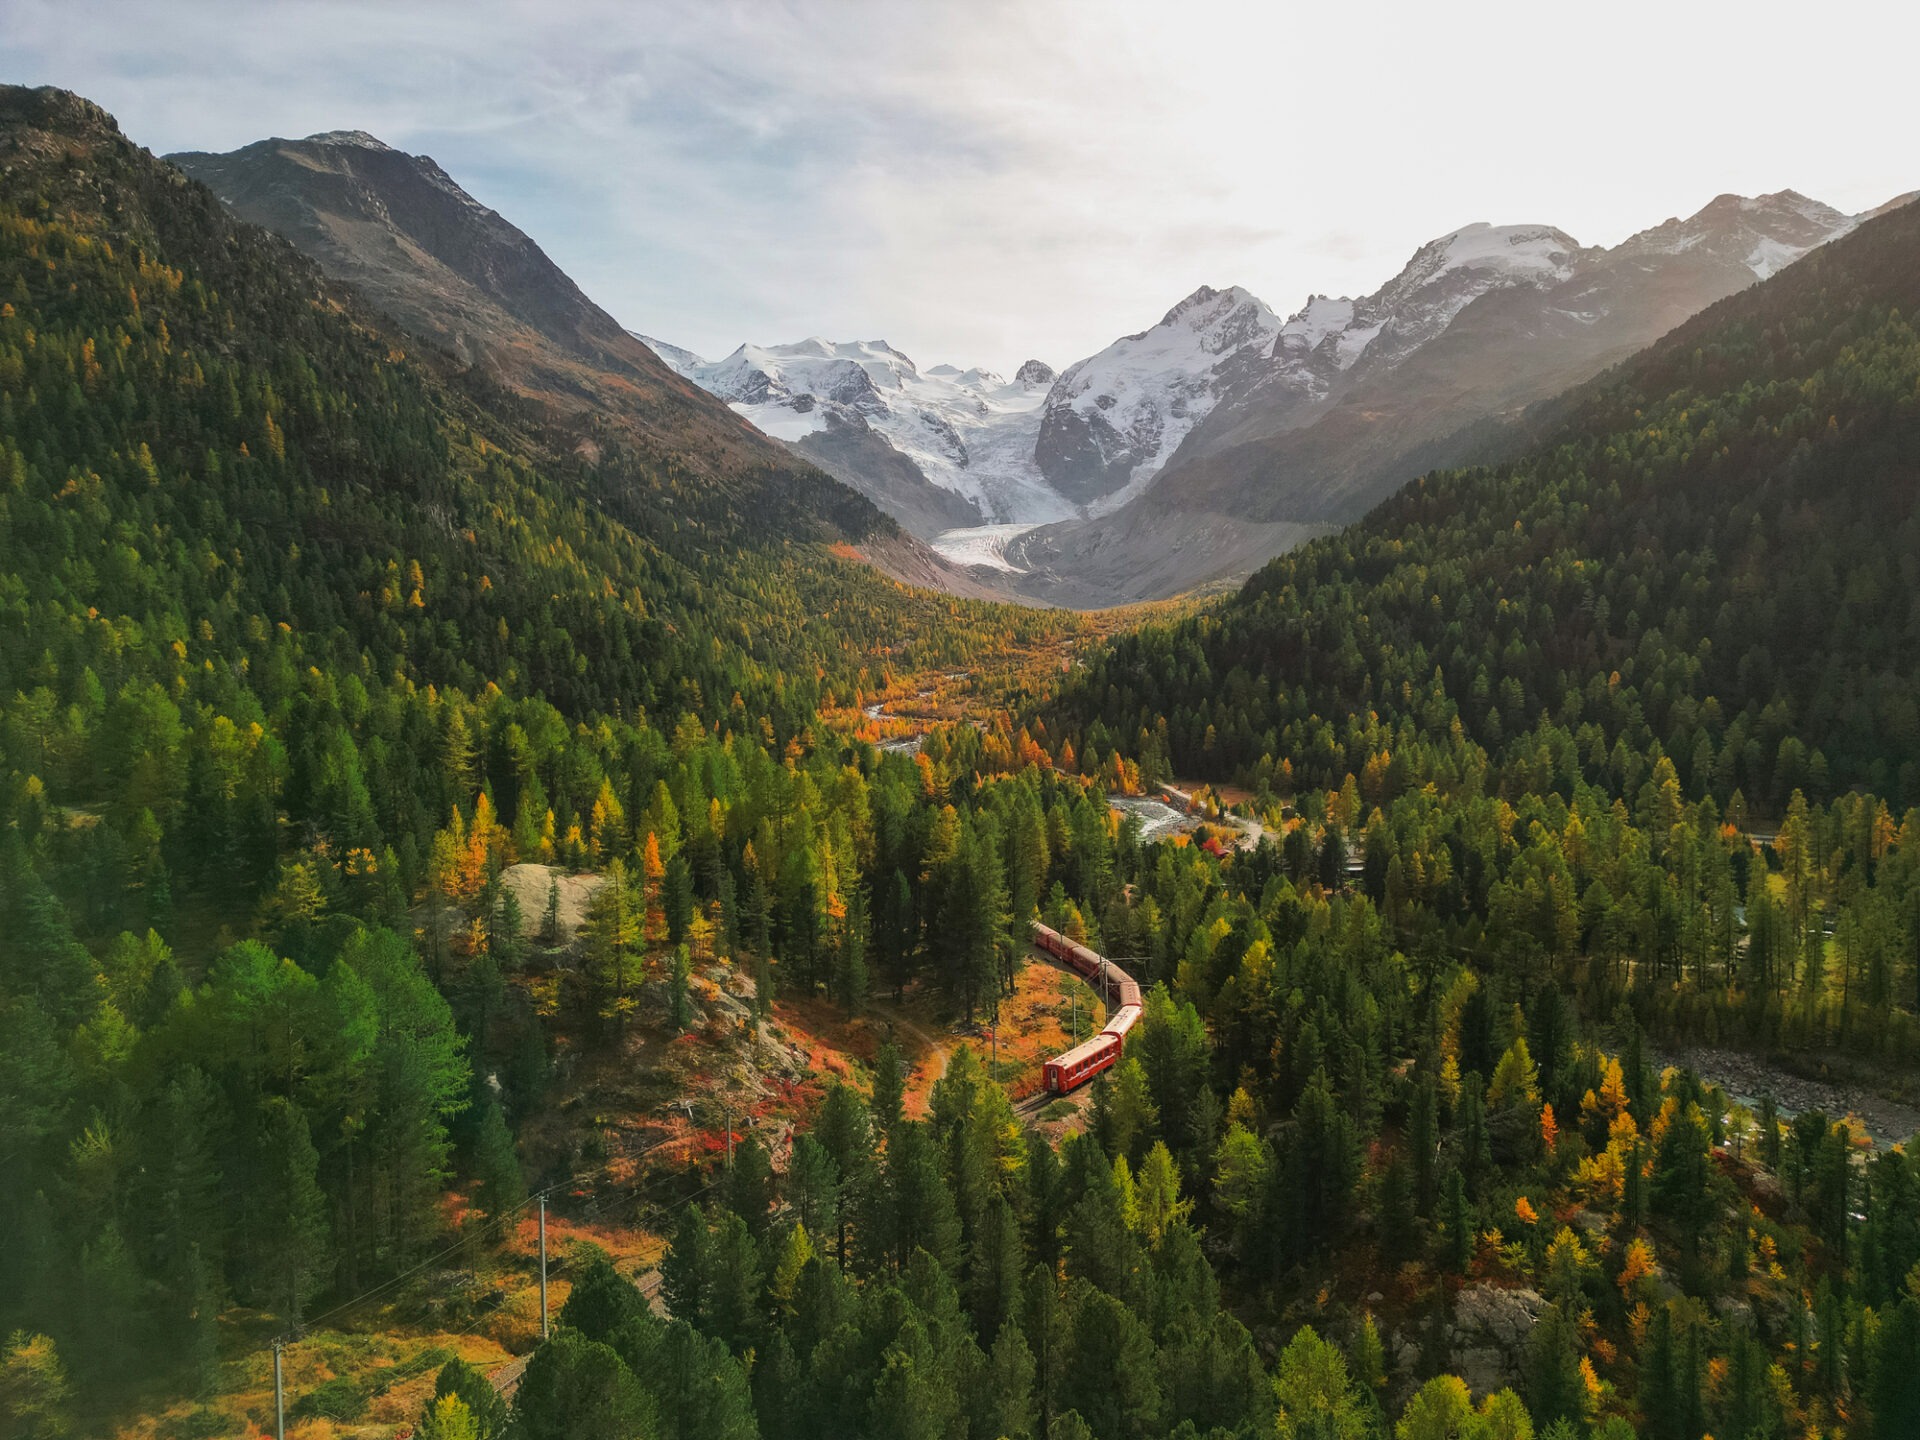 A scenic autumn valley with a red train running through it, surrounded by vibrant forests and snow-capped mountains under a soft light.